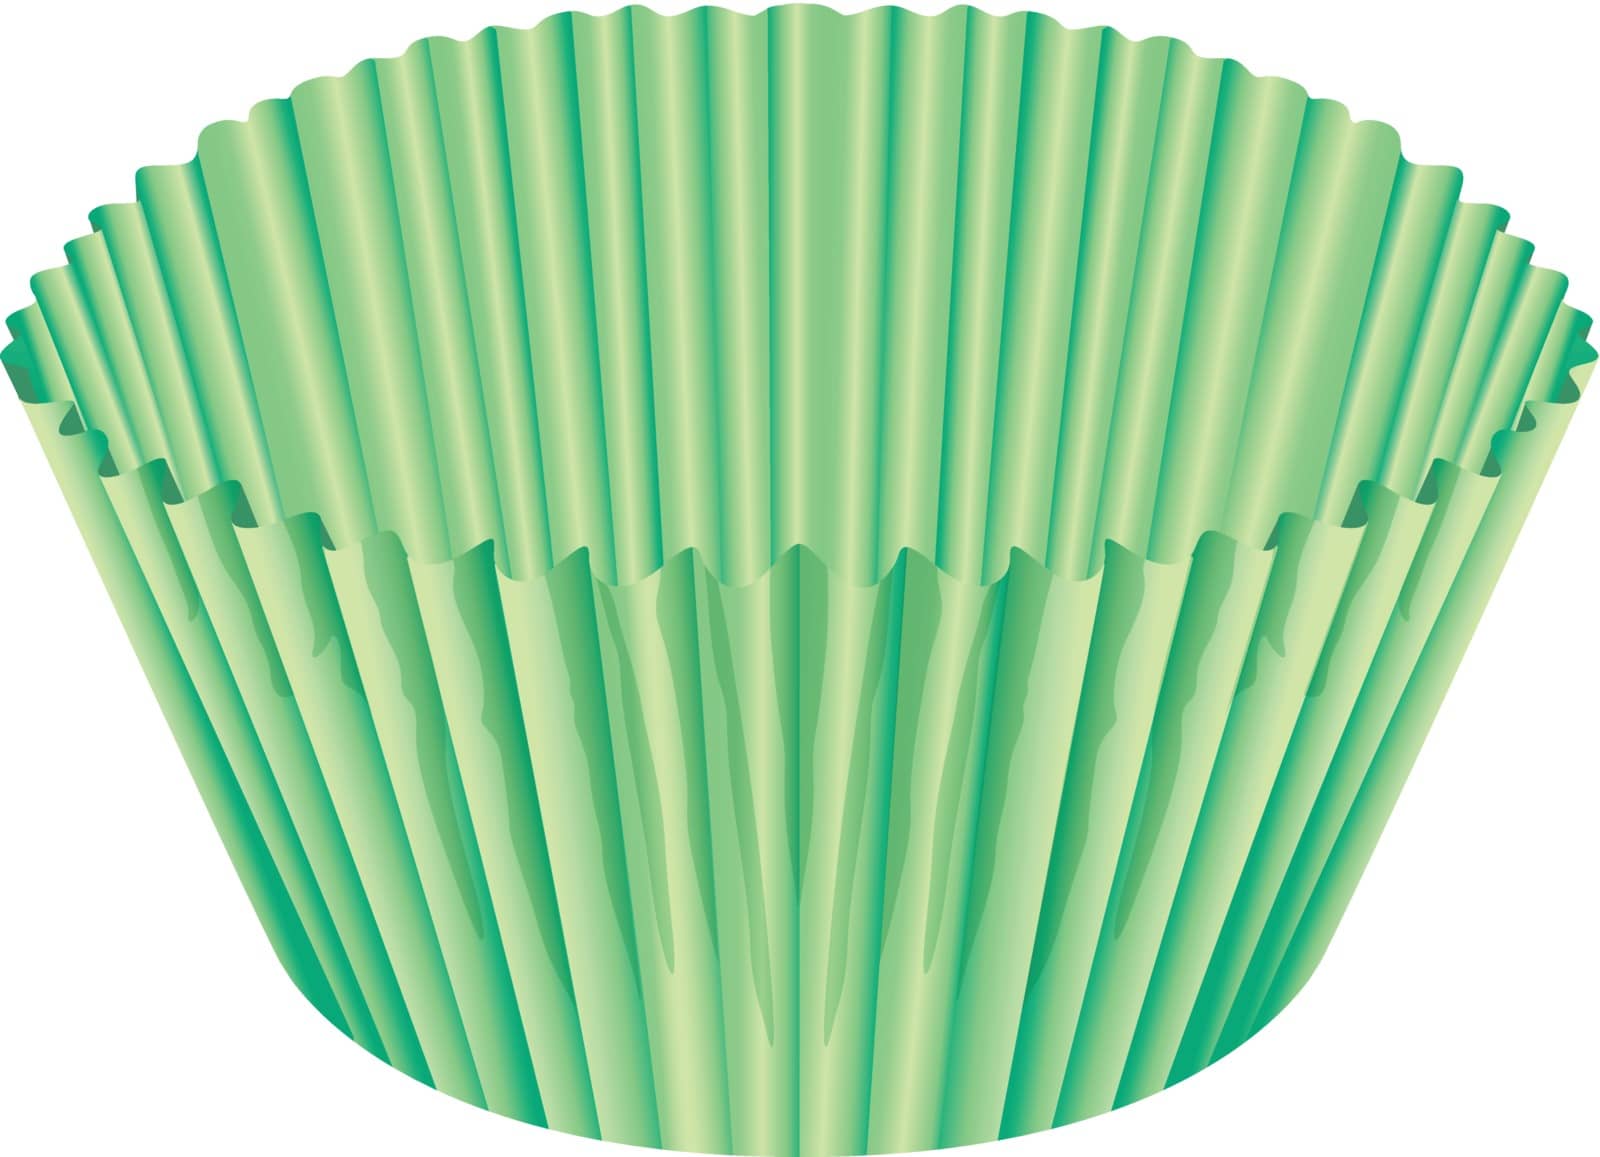 illustration of a green cup on a white background